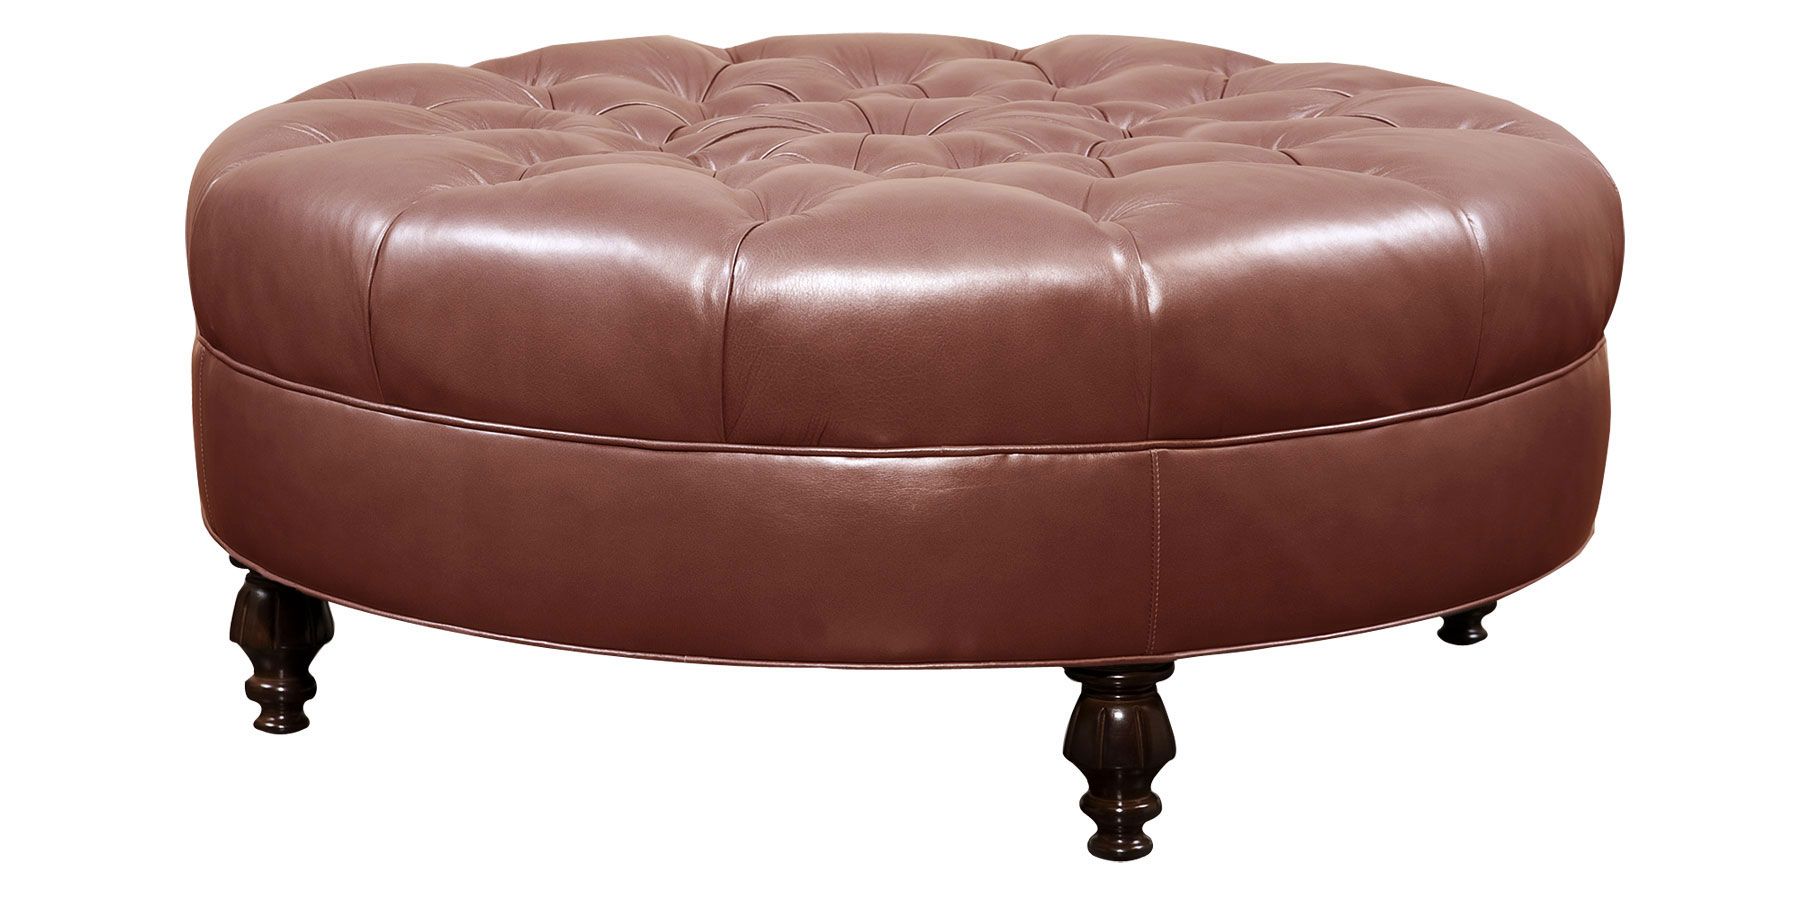 Ives Fabric Or Leather Large Round Tufted Ottoman Leather Ottomans Coffee Table Free (View 5 of 10)